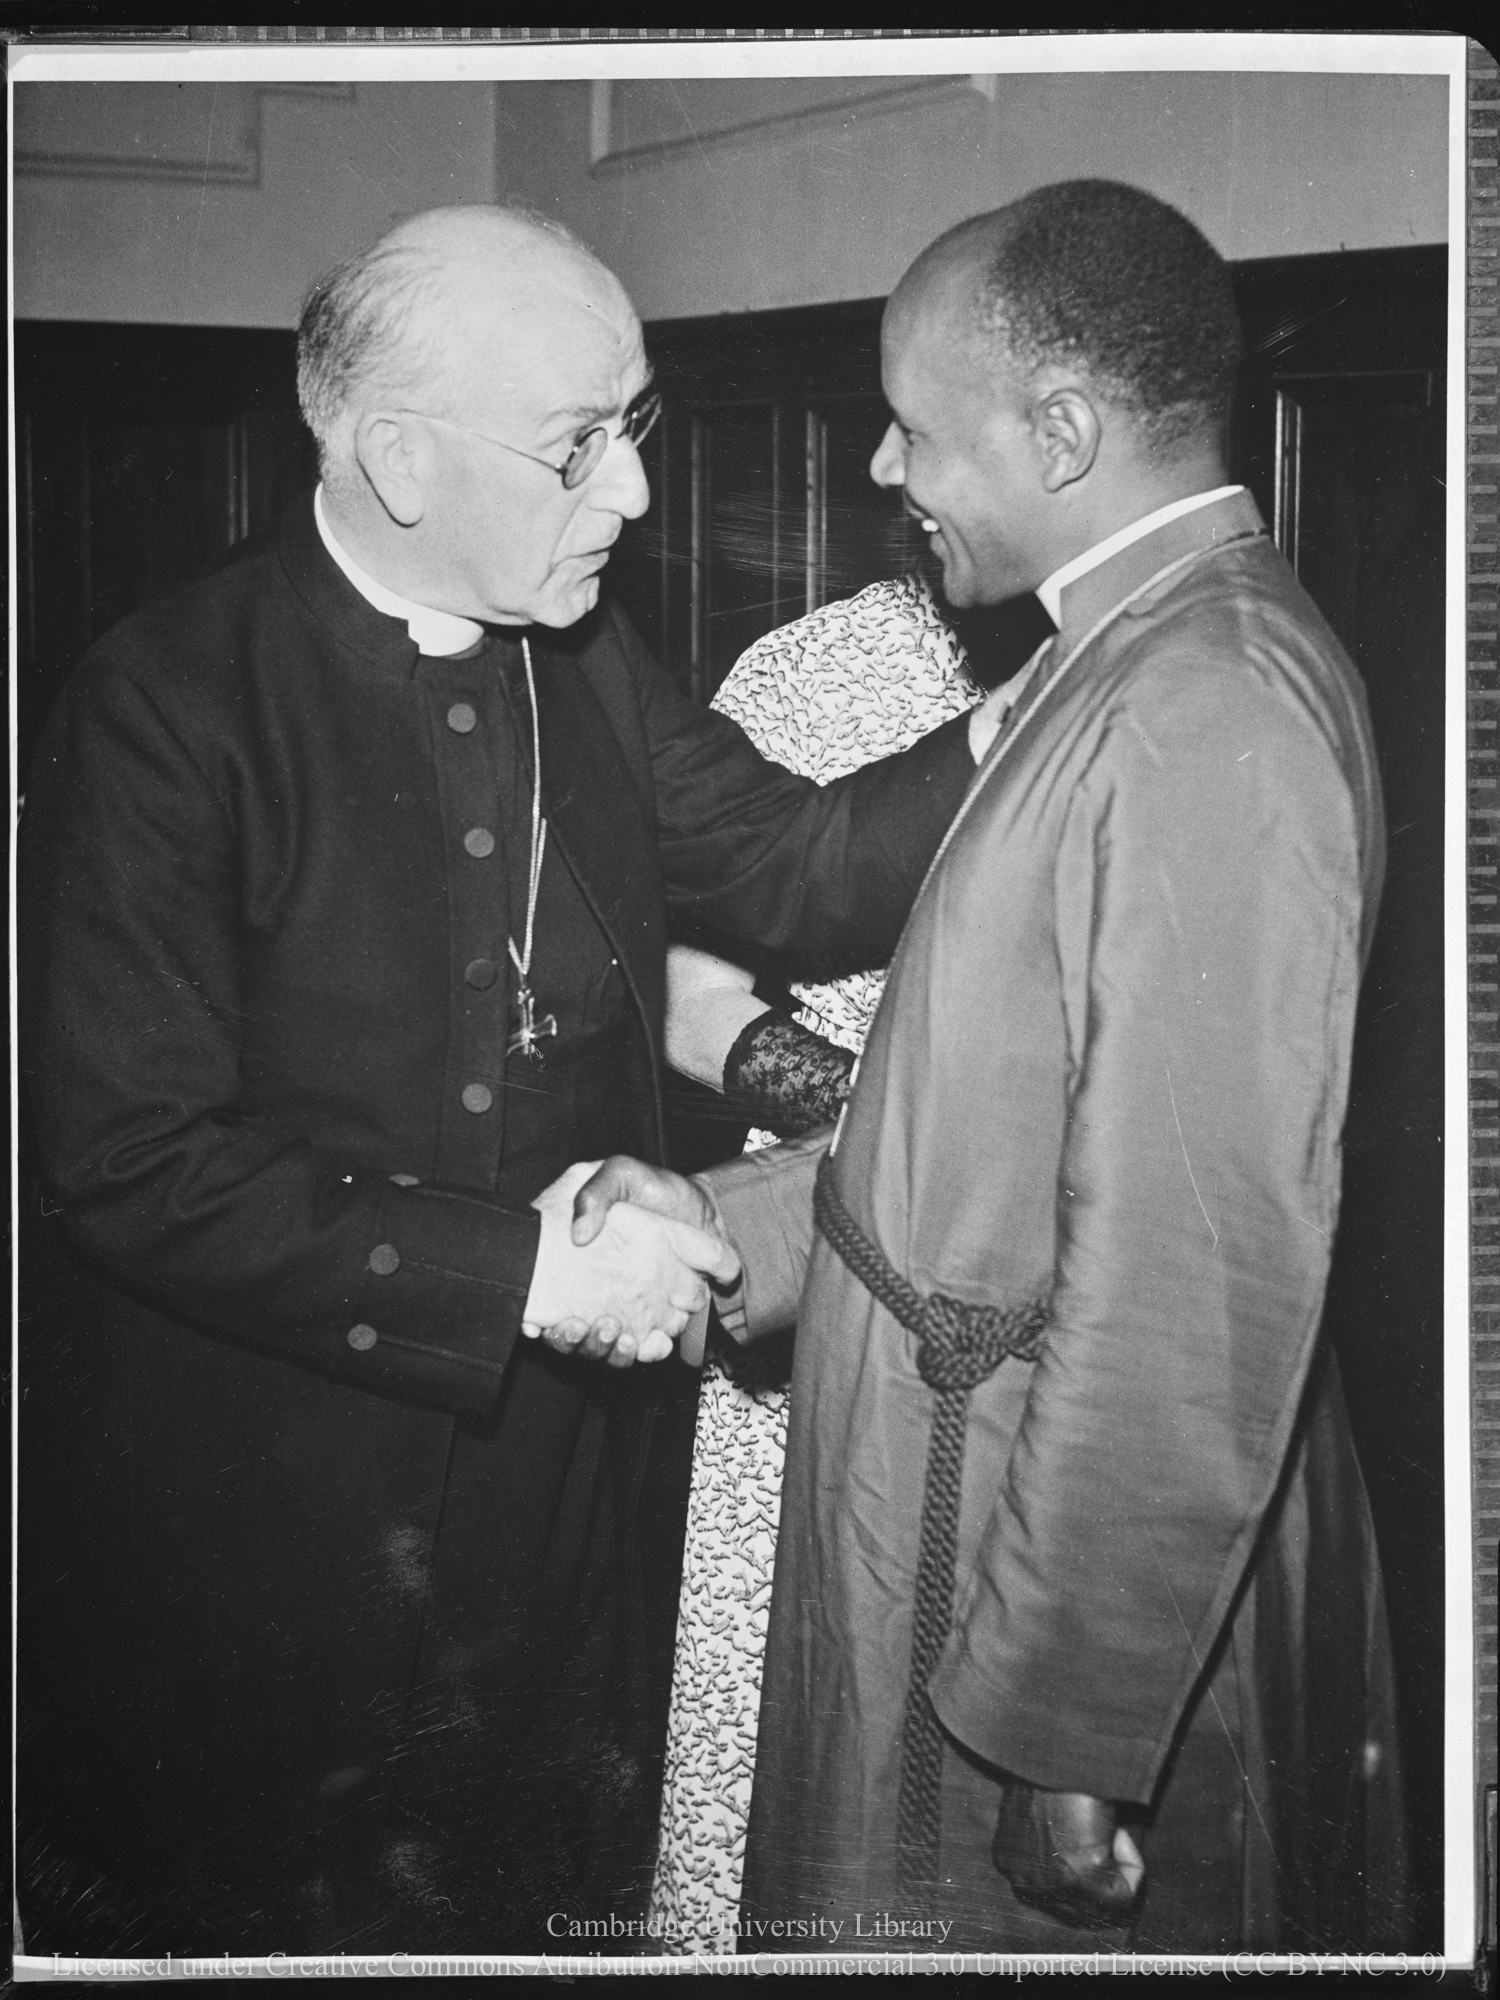 Dr Fisher with the Rt. Rev. Obadiah Kariuki, whom he consecrated as Assistant Bishop for the Diocese of Mombasa, 1955